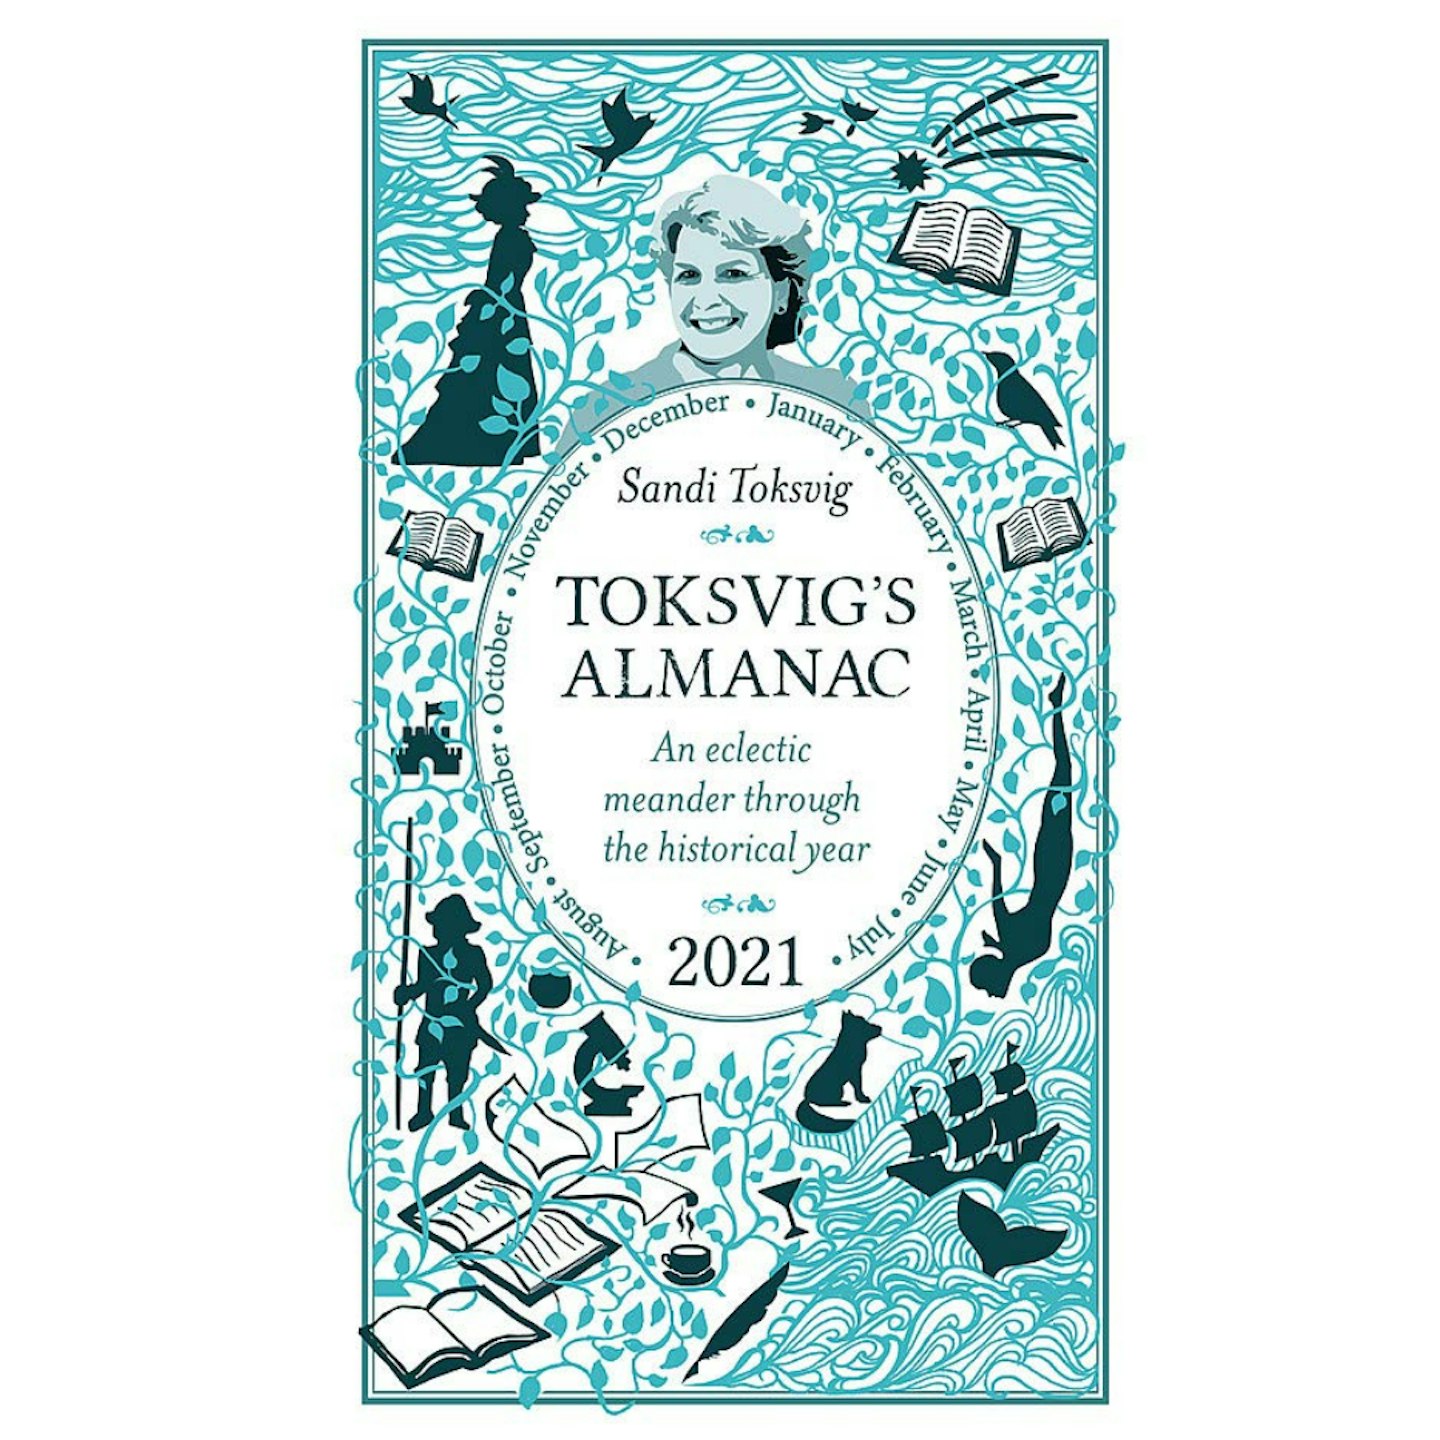 Toksvig's Almanac 2021: An Eclectic Meander Through the Historical Year